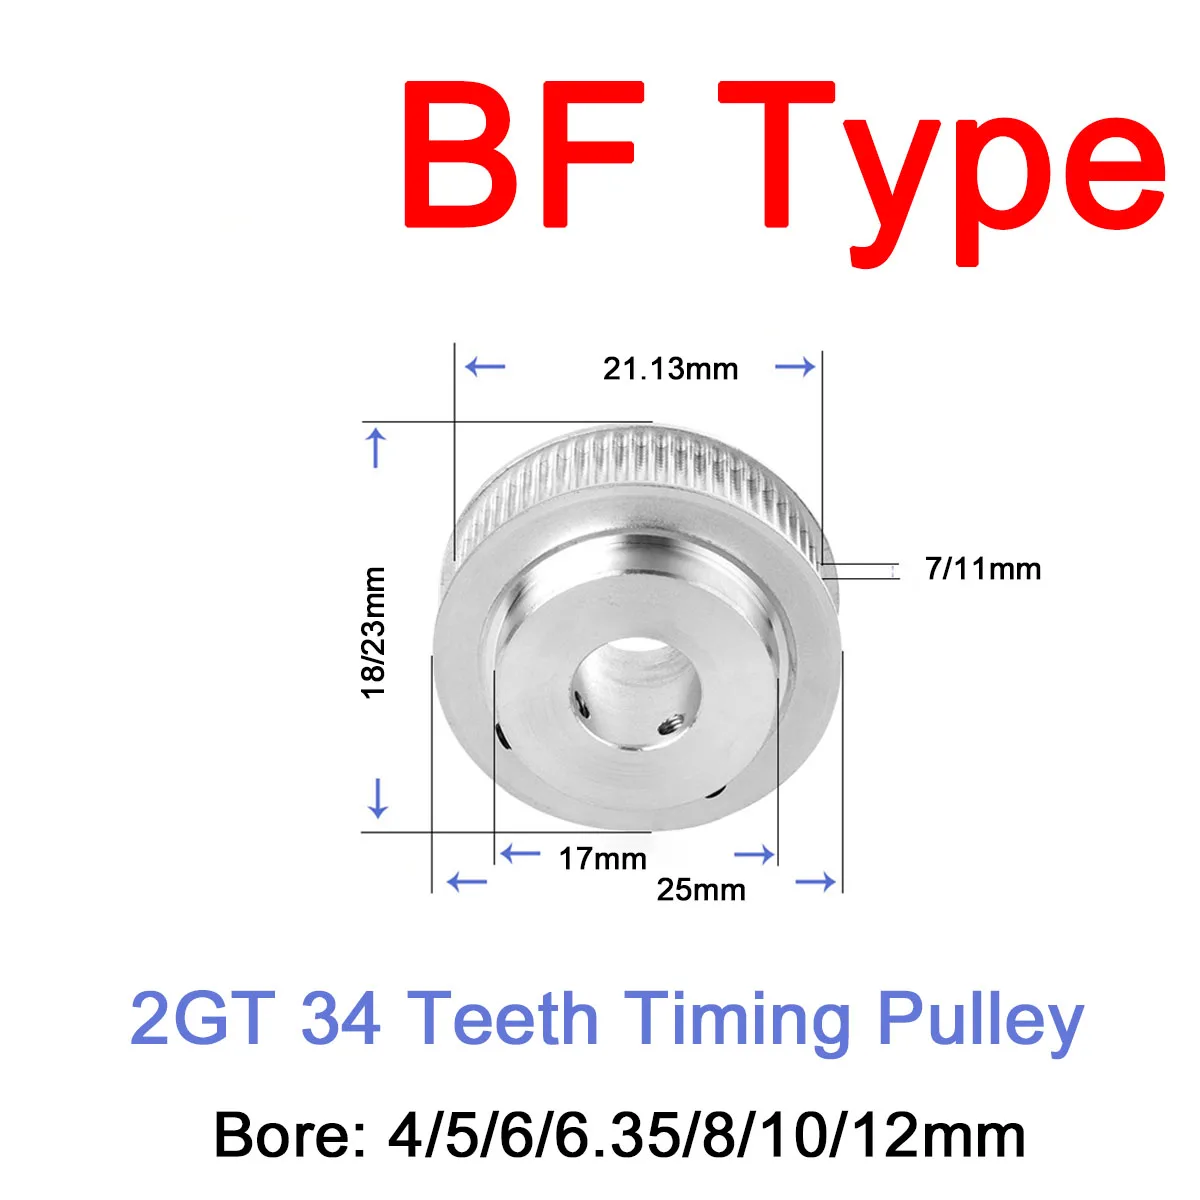 

1Pc 34 Teeth 2GT GT2 BF Type Synchronous Wheel Idler Pulley Bore 4/5/6/6.35/8/10/12mm Aluminium Timing Pulley Width 7mm 11mm